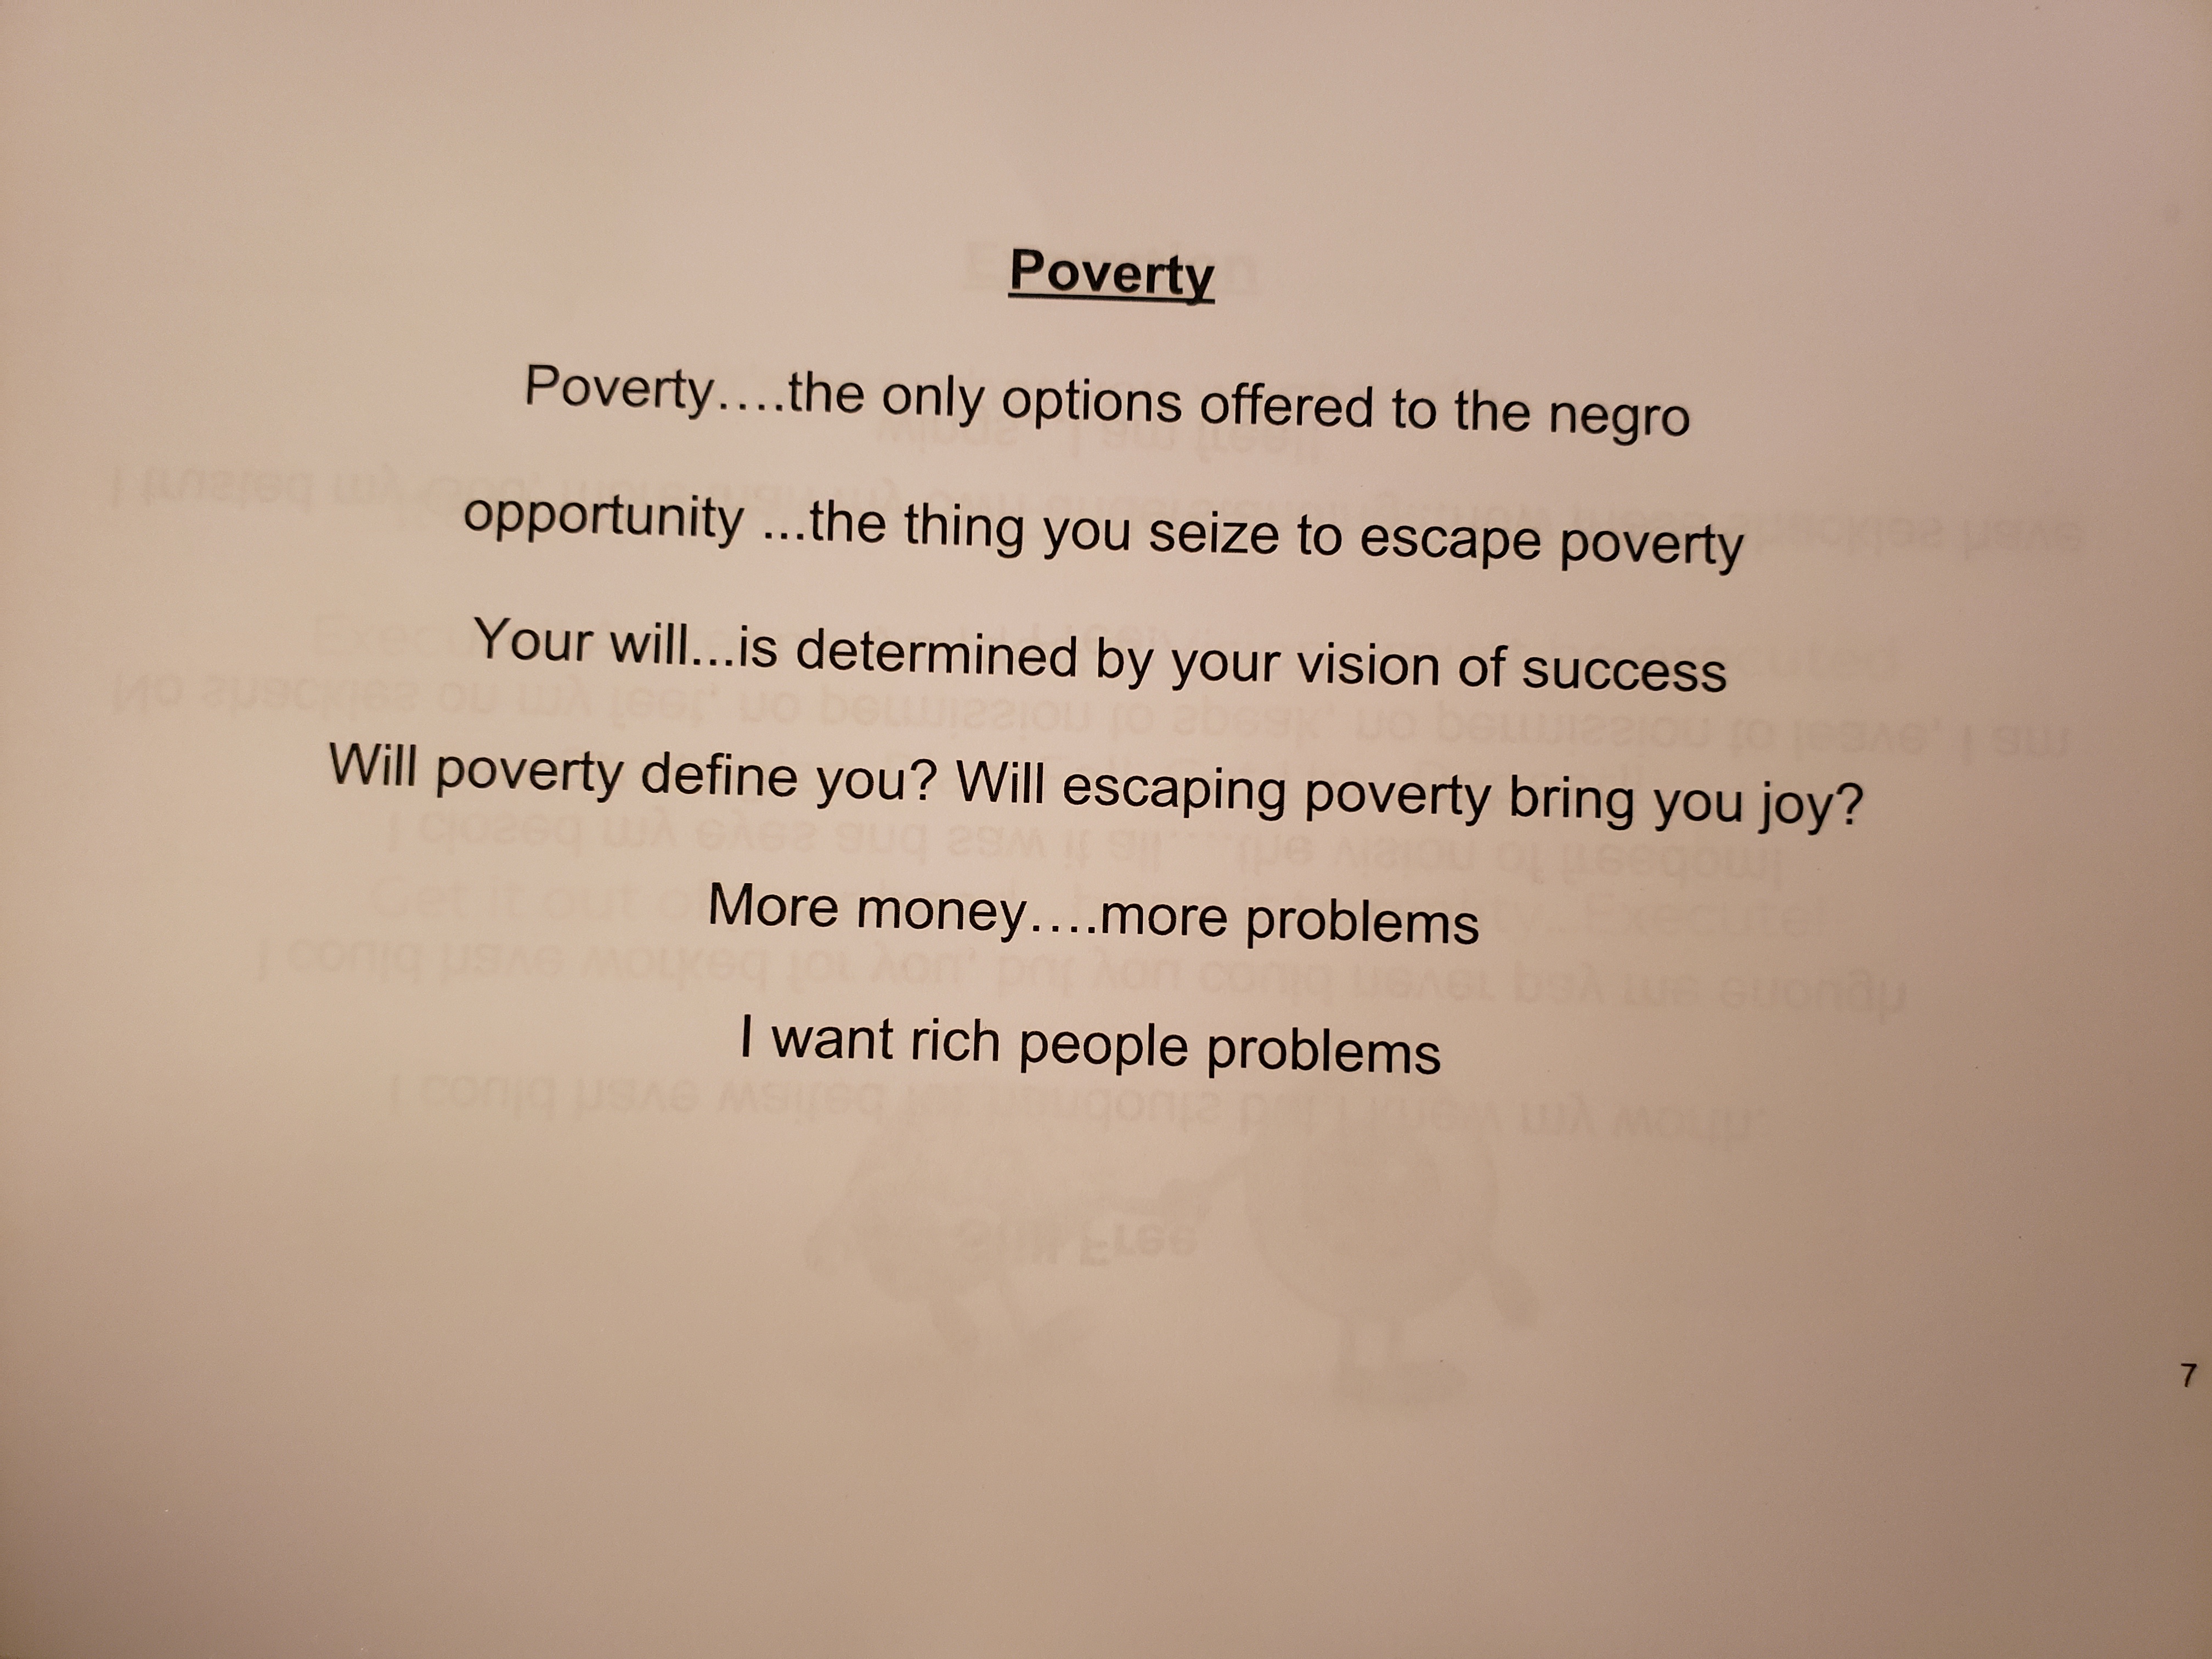 A poem on poverty and not letting it define you.